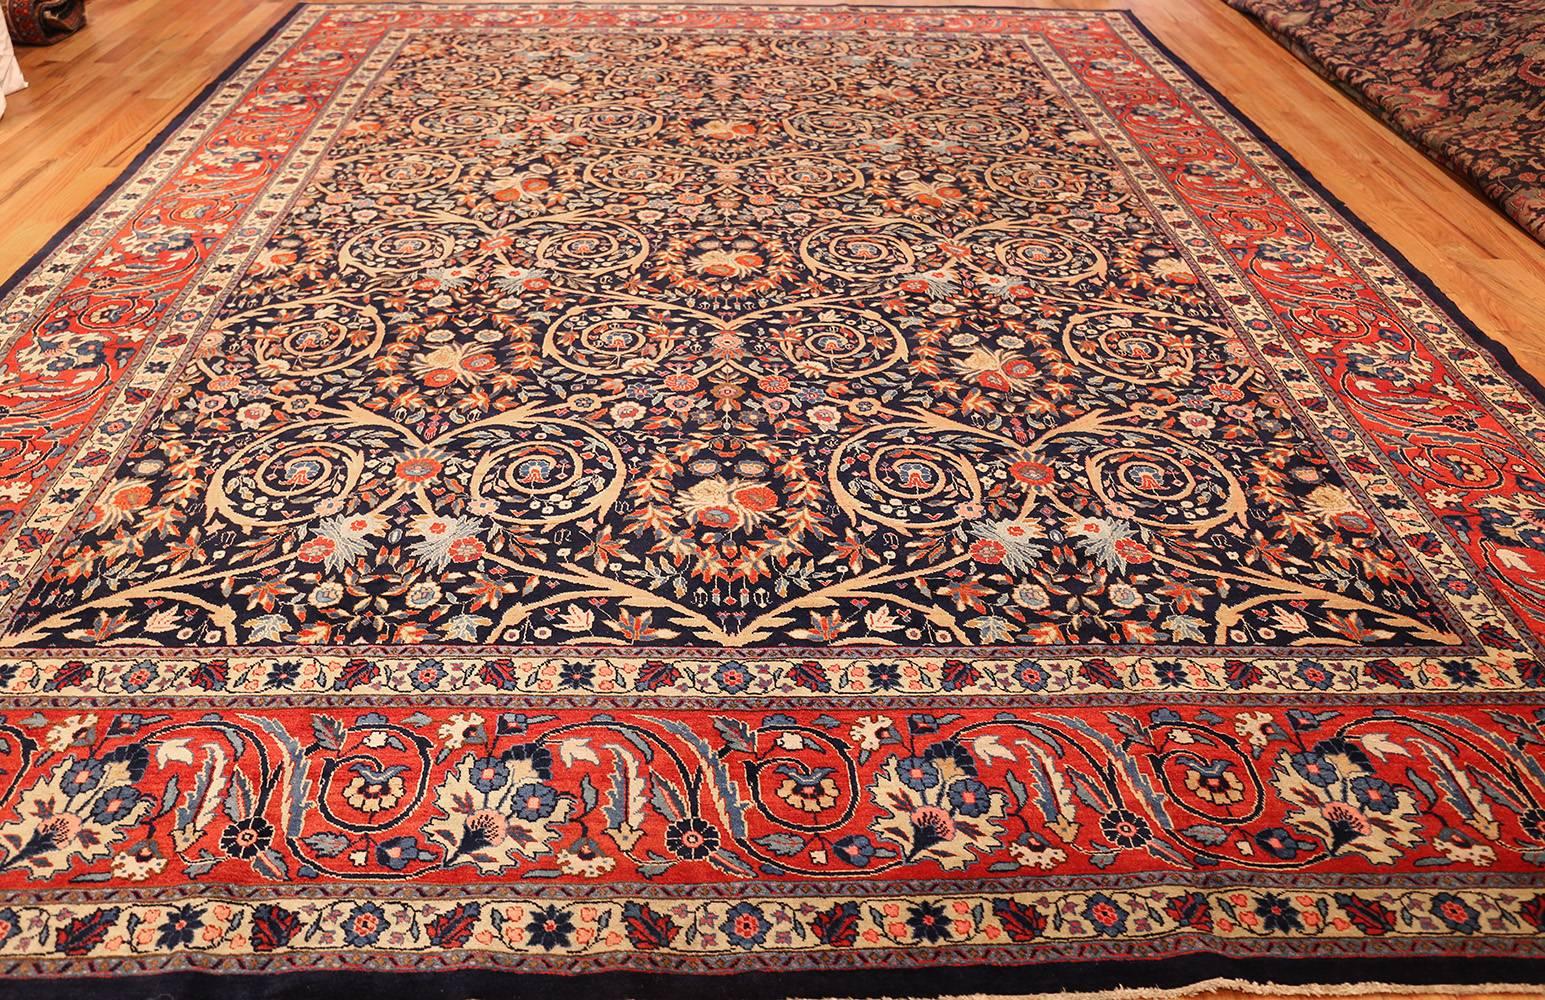 20th Century Beautiful Antique Persian Tabriz Carpet. Size: 11 ft x 14 ft 3 in